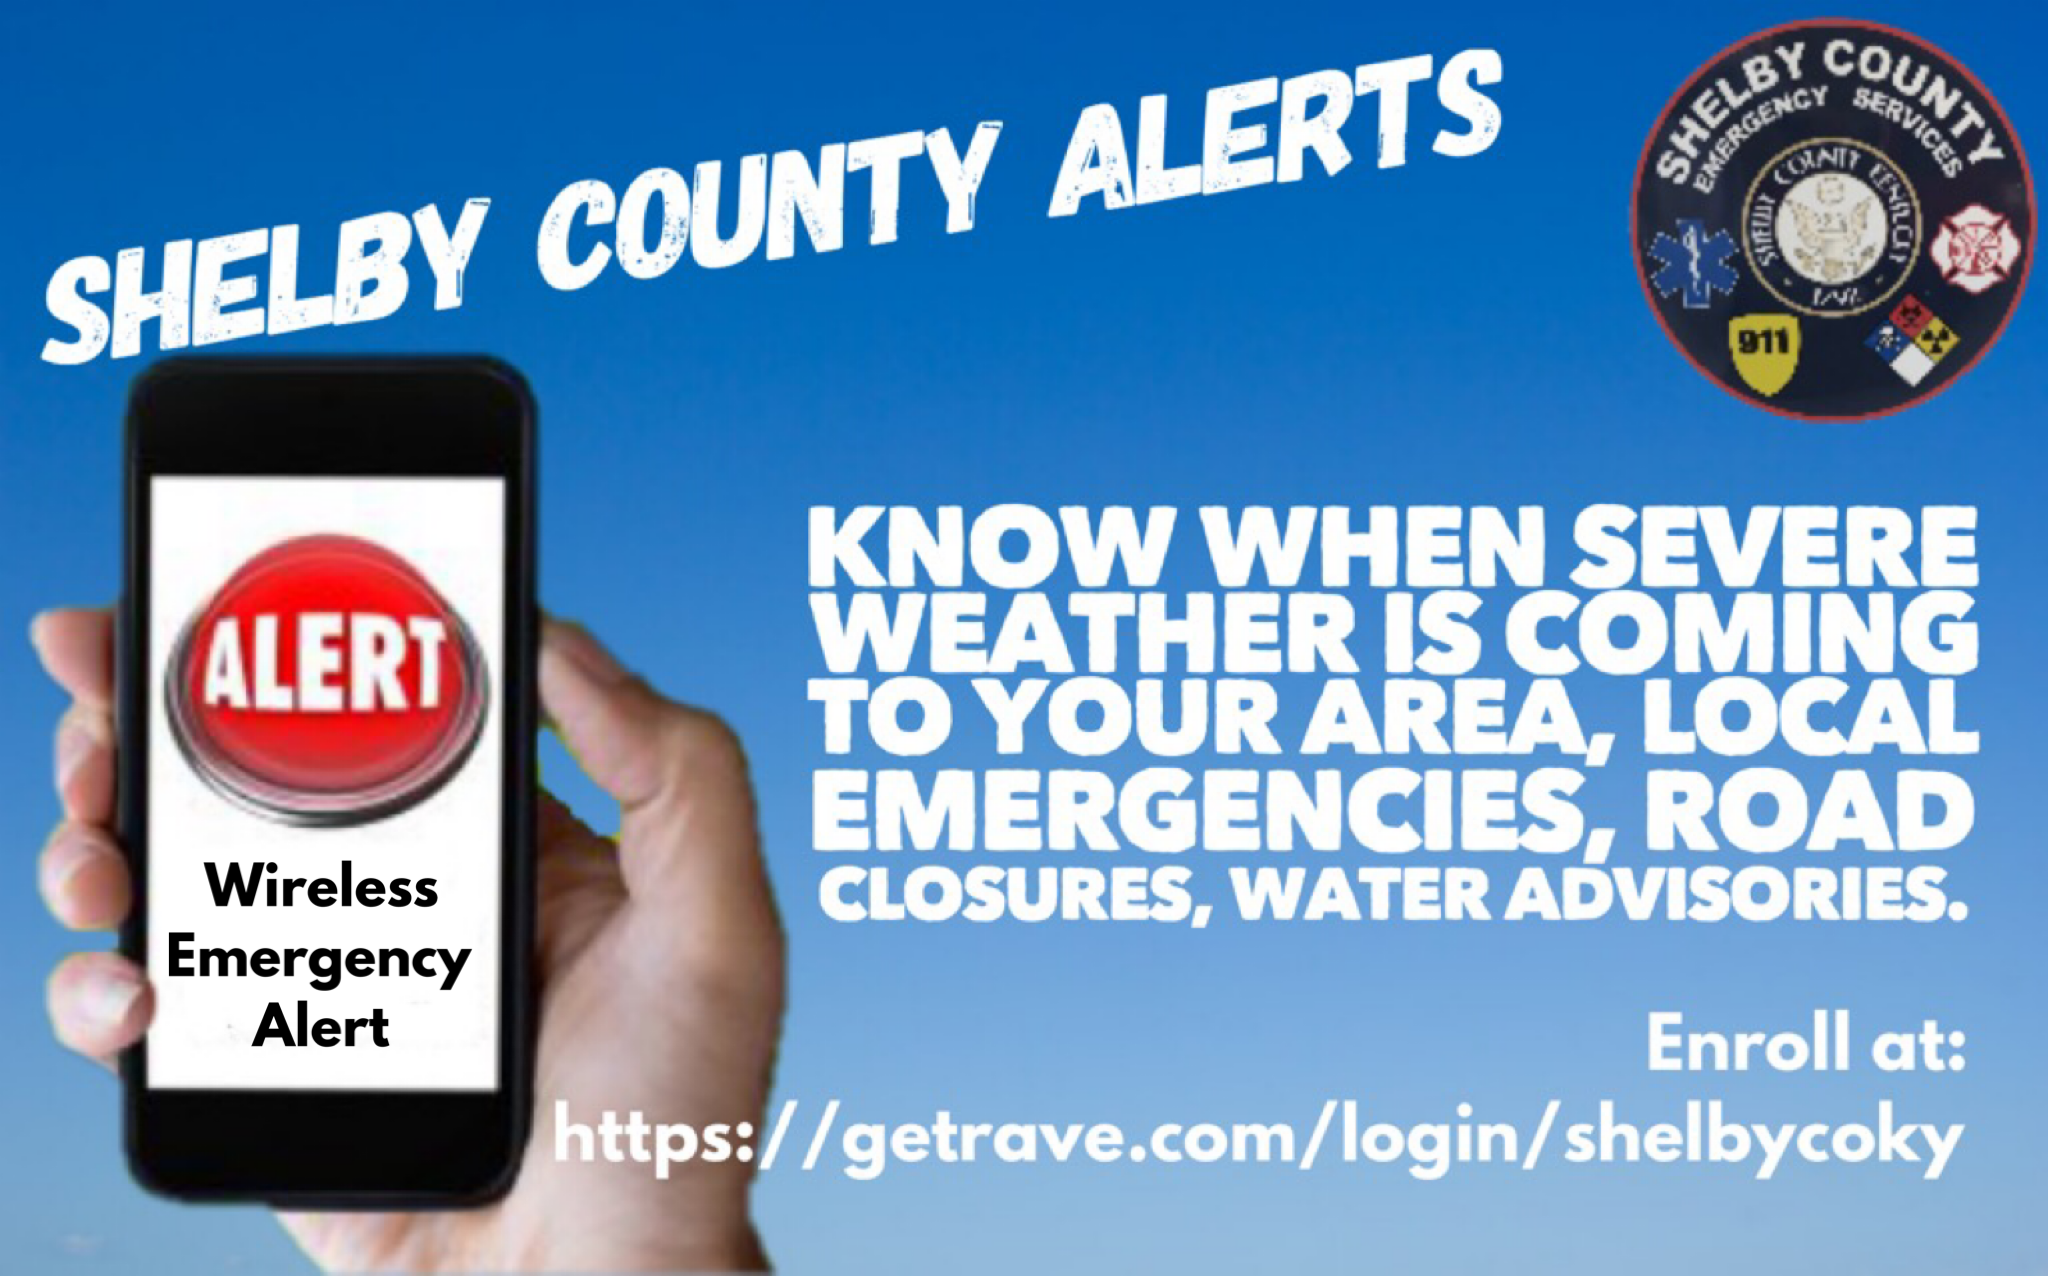 Shelby County Alerts.png